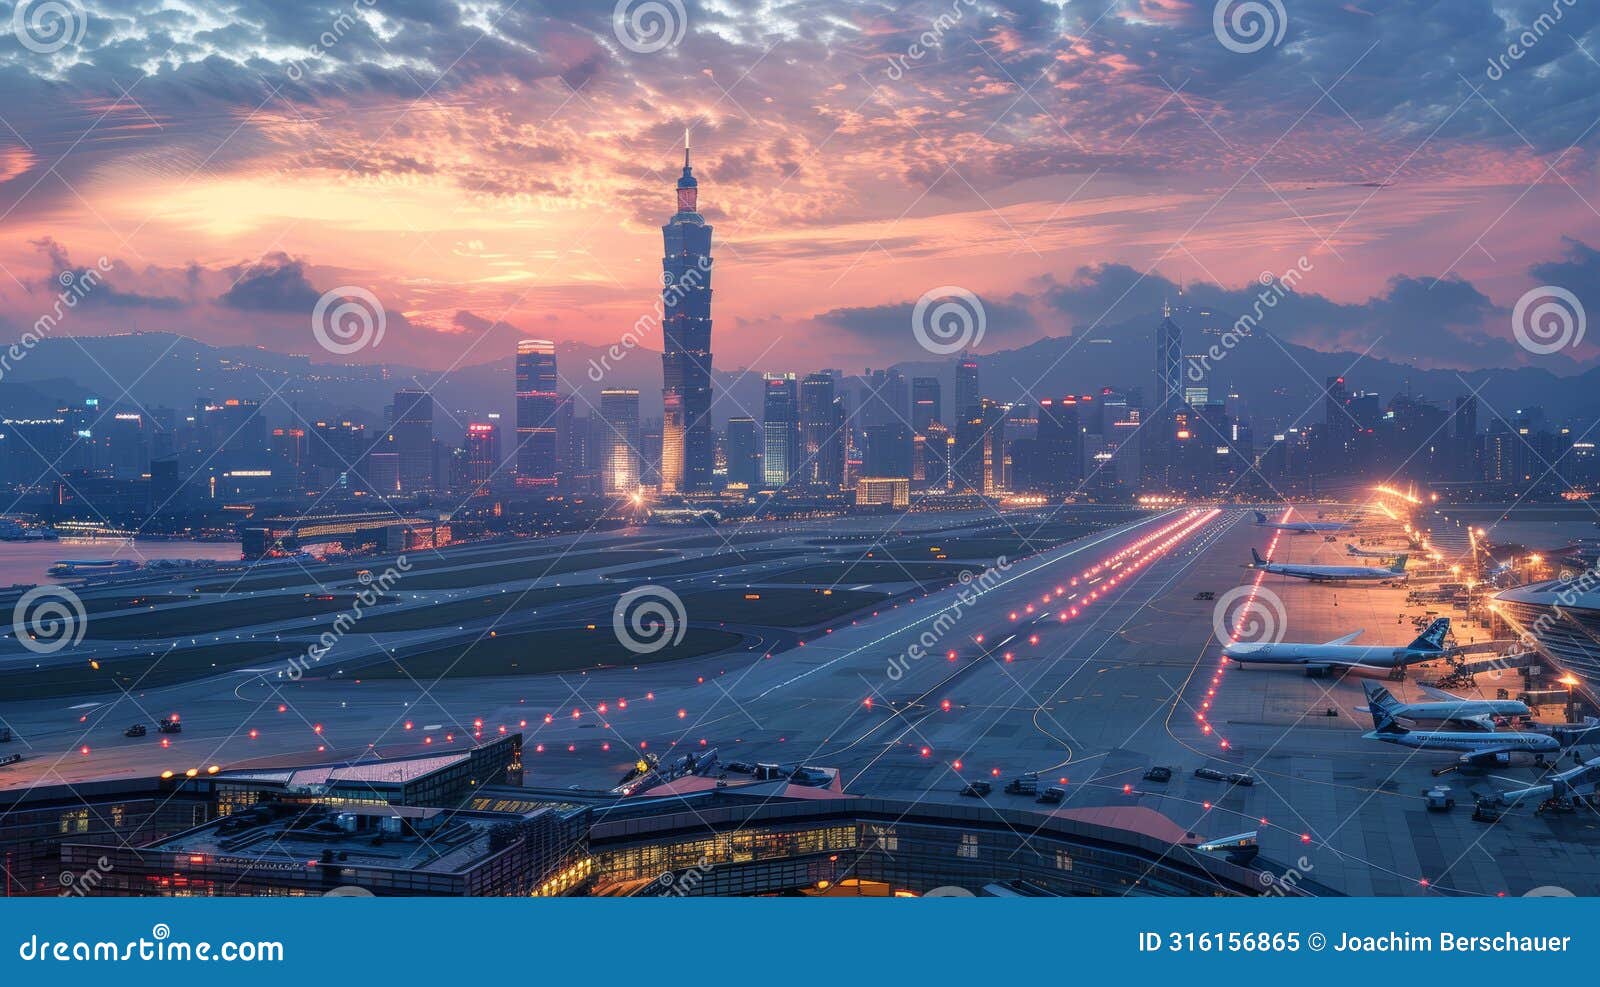 vibrant urban airport scene with aircraft departing and arriving amidst city skyscrapers